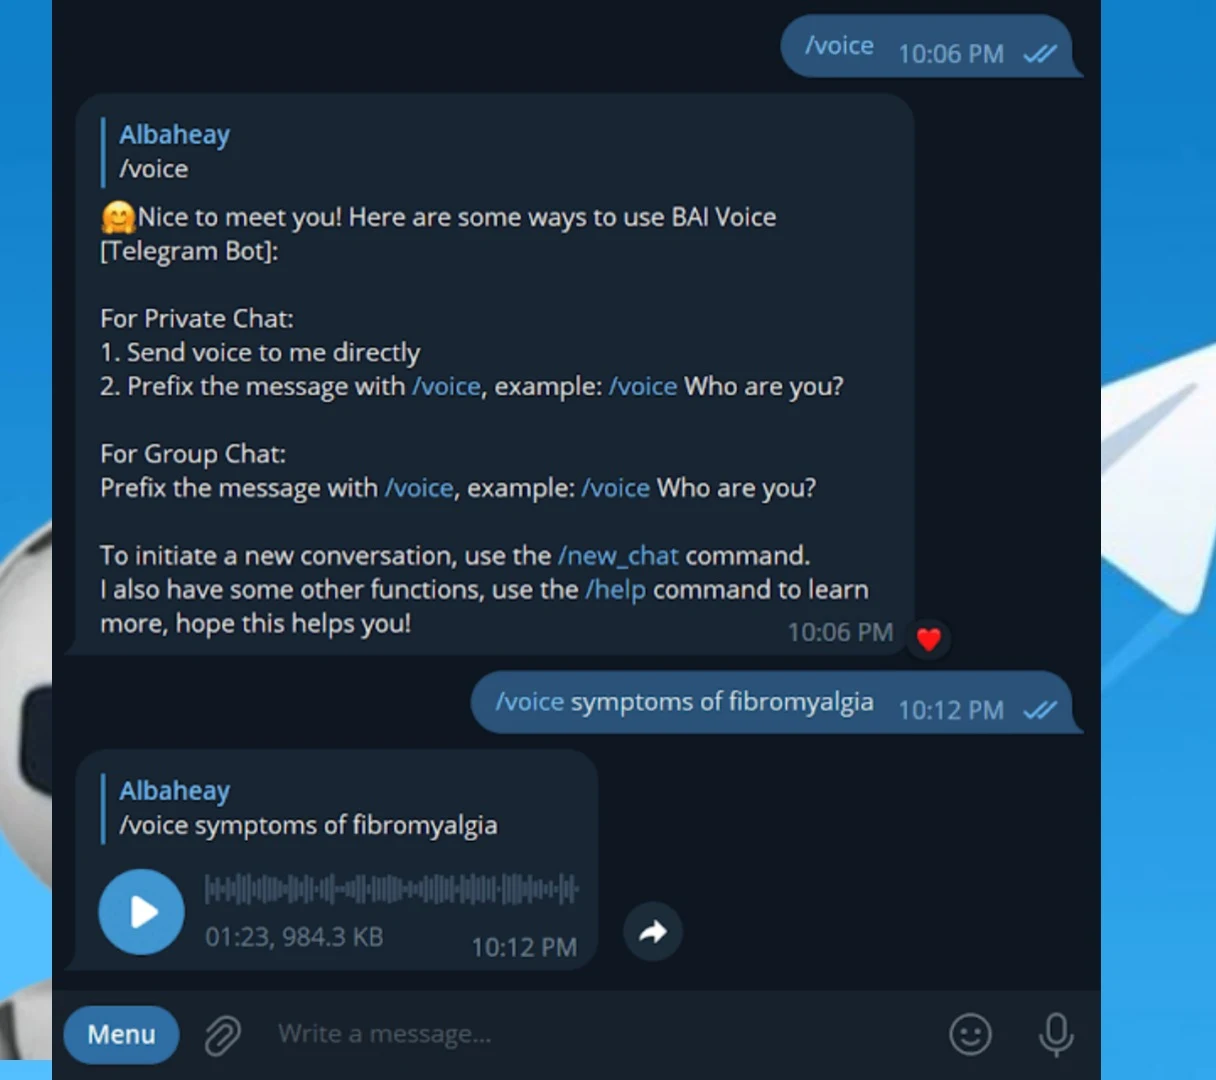 Telegram bot BAI for chatting with artificial intelligence via voice and images.